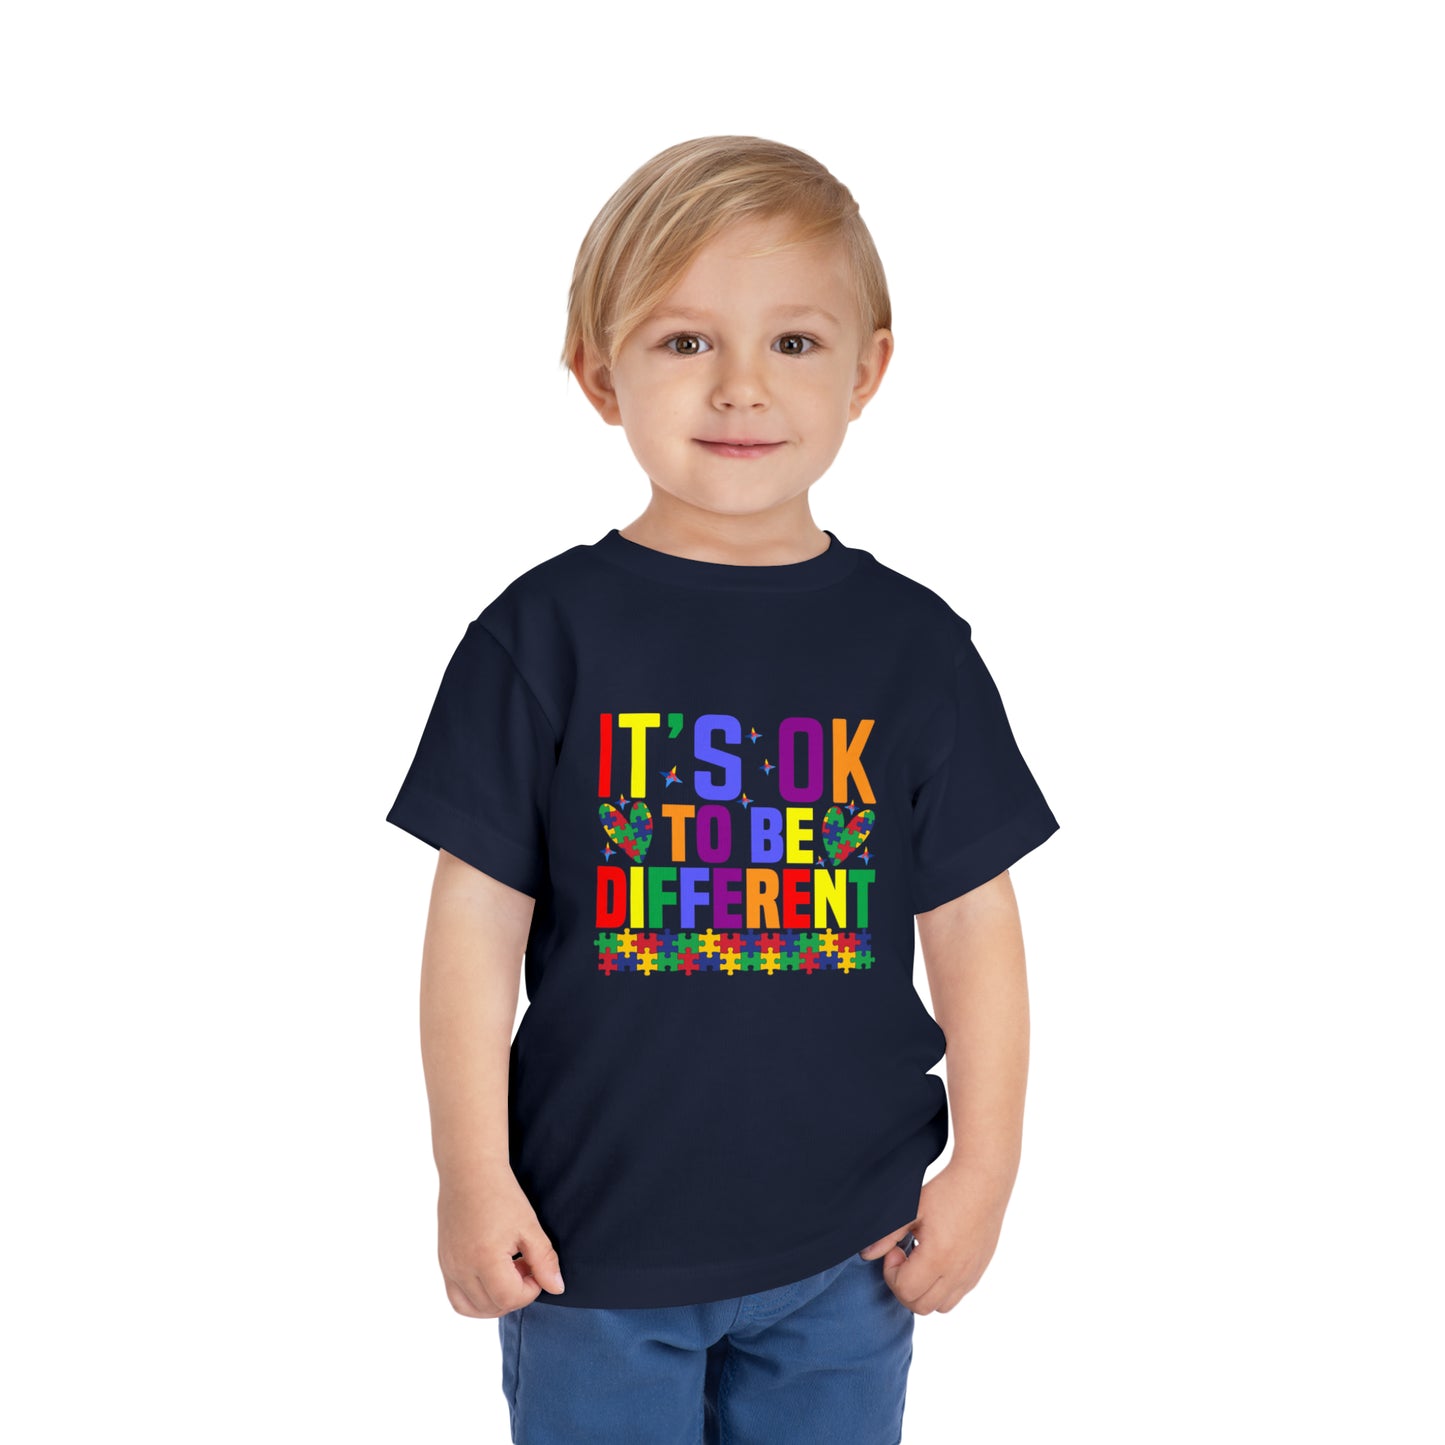 It's OK to be different Autism Acceptance Awareness Advocate Toddler Short Sleeve Tee